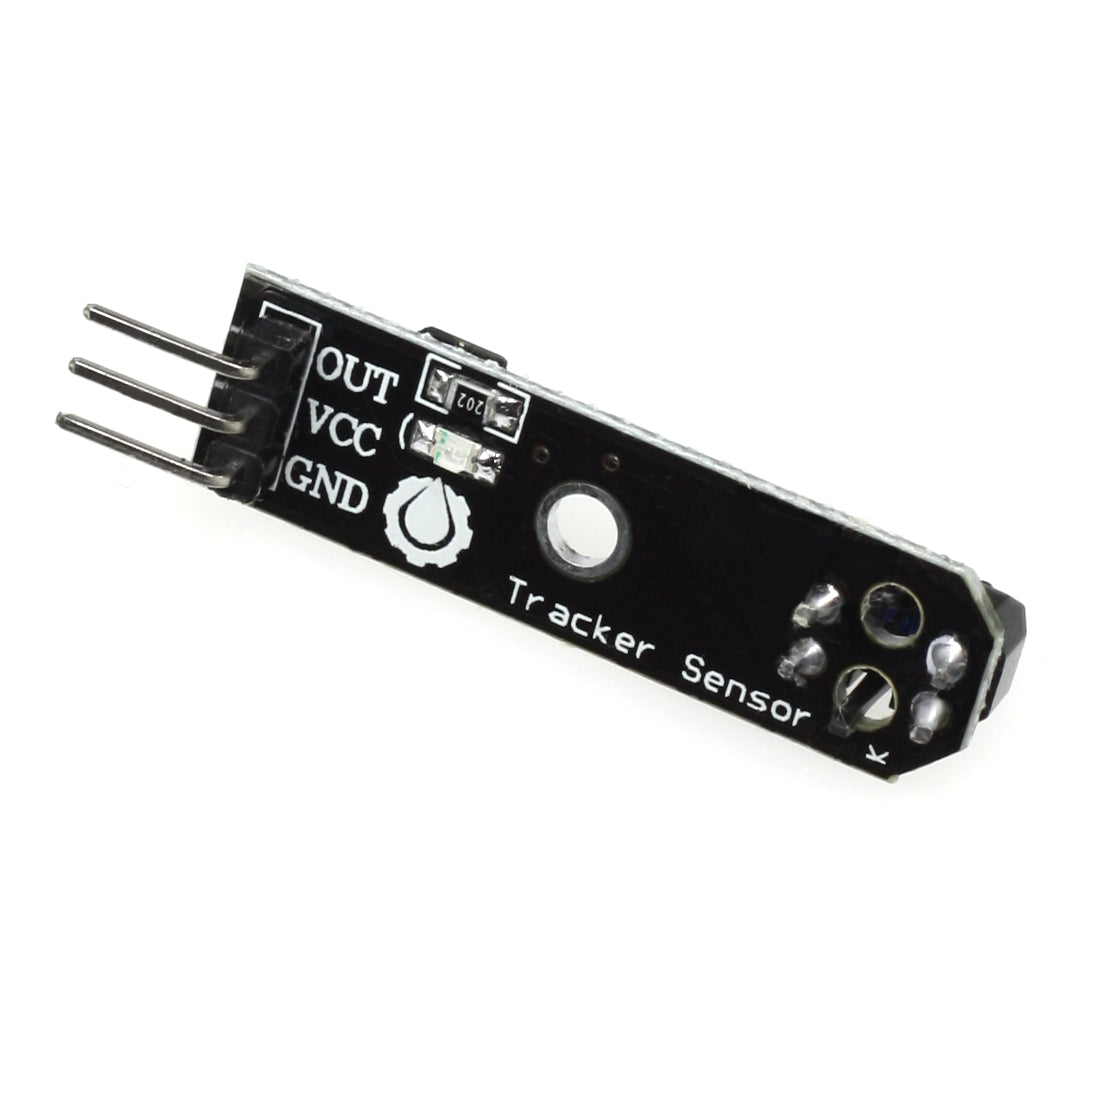 Path/Line Detector for Line Following Robots, TCRT5000 Infrared Sensor